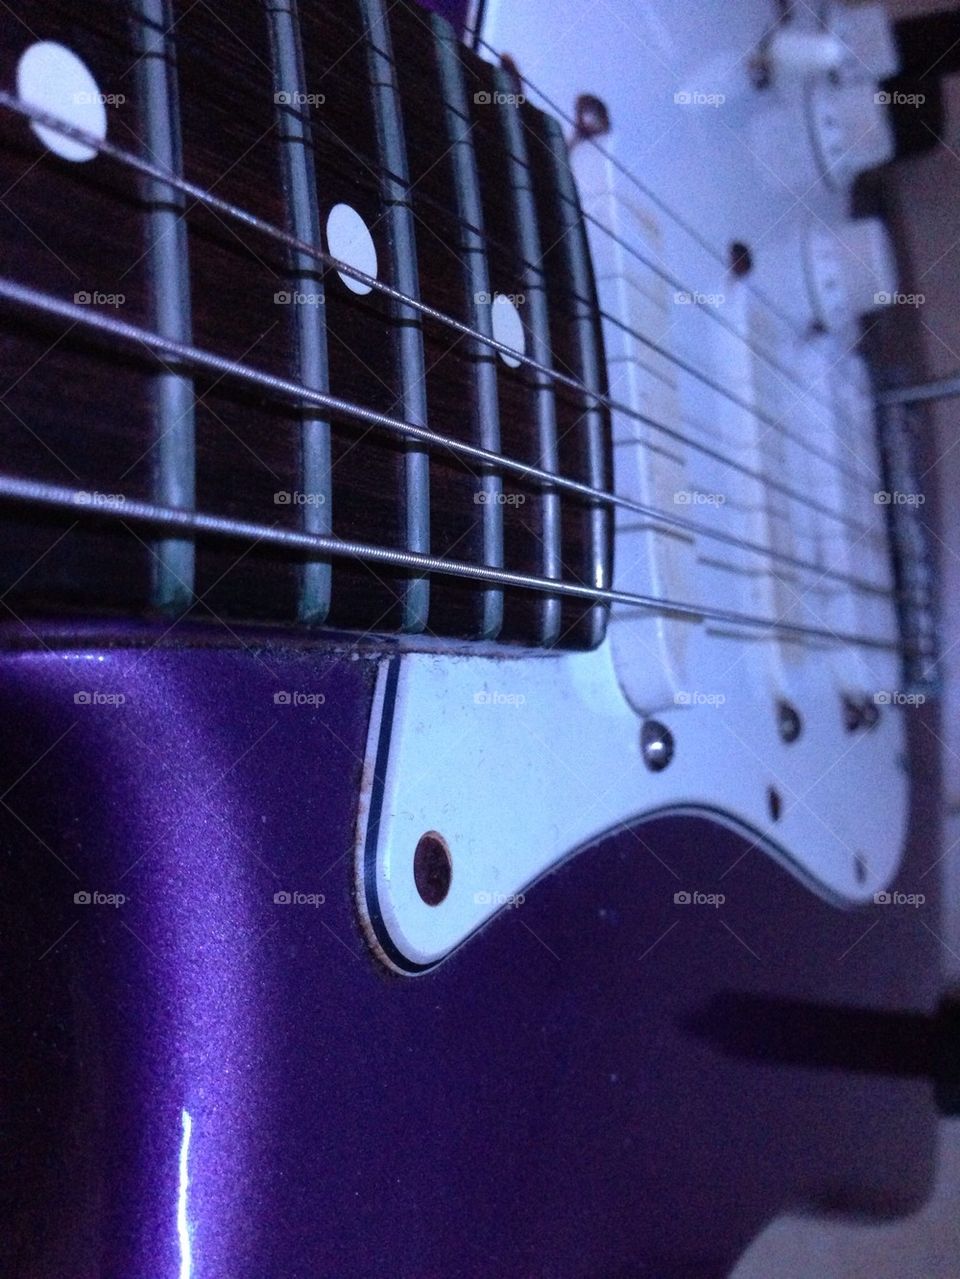 guitar violet by beile